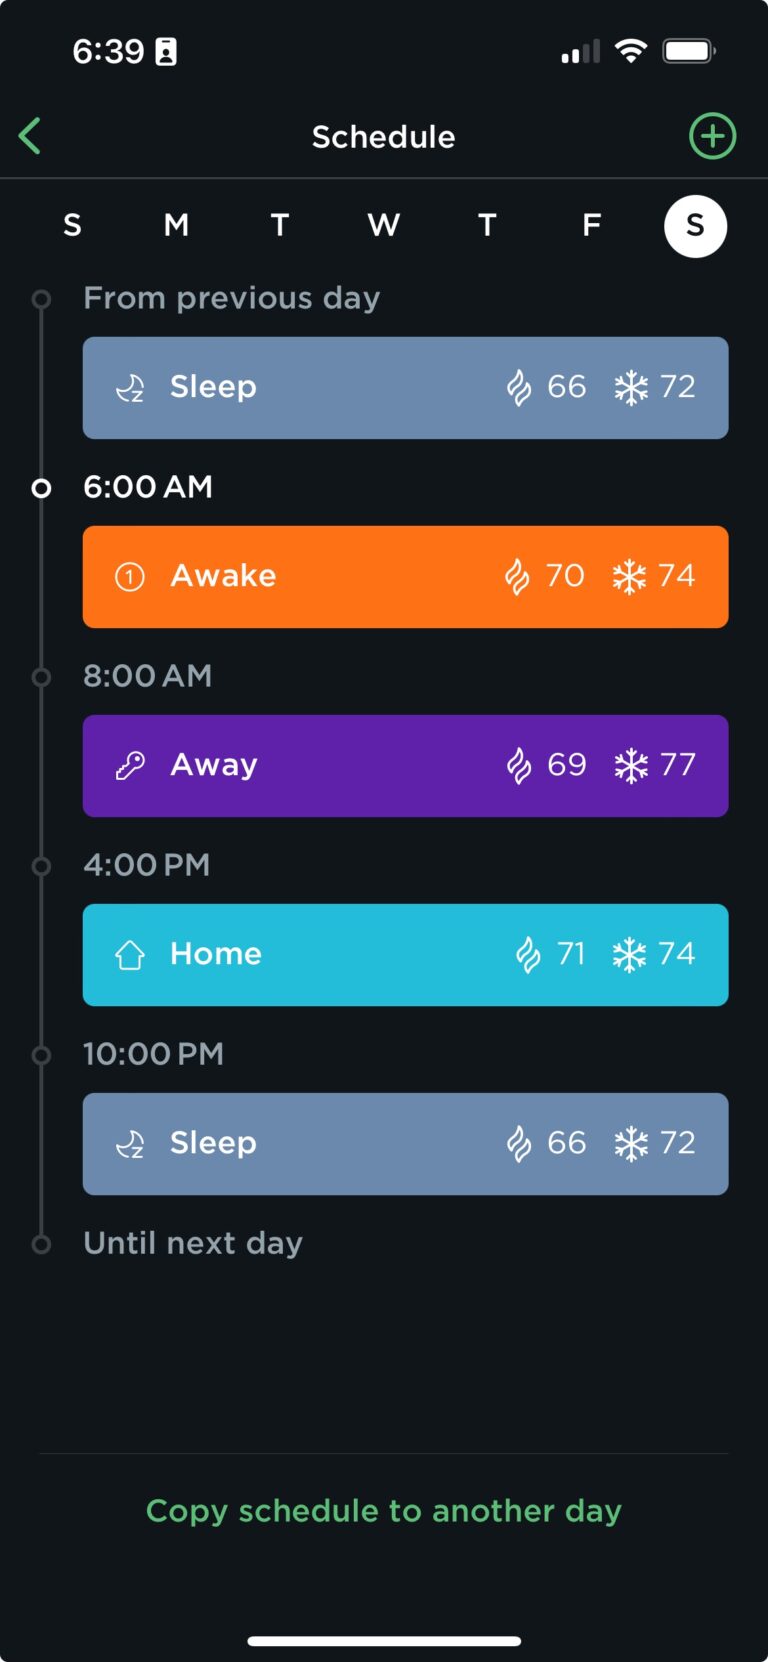 ecobee’s schedule that I follow to stay comfortable